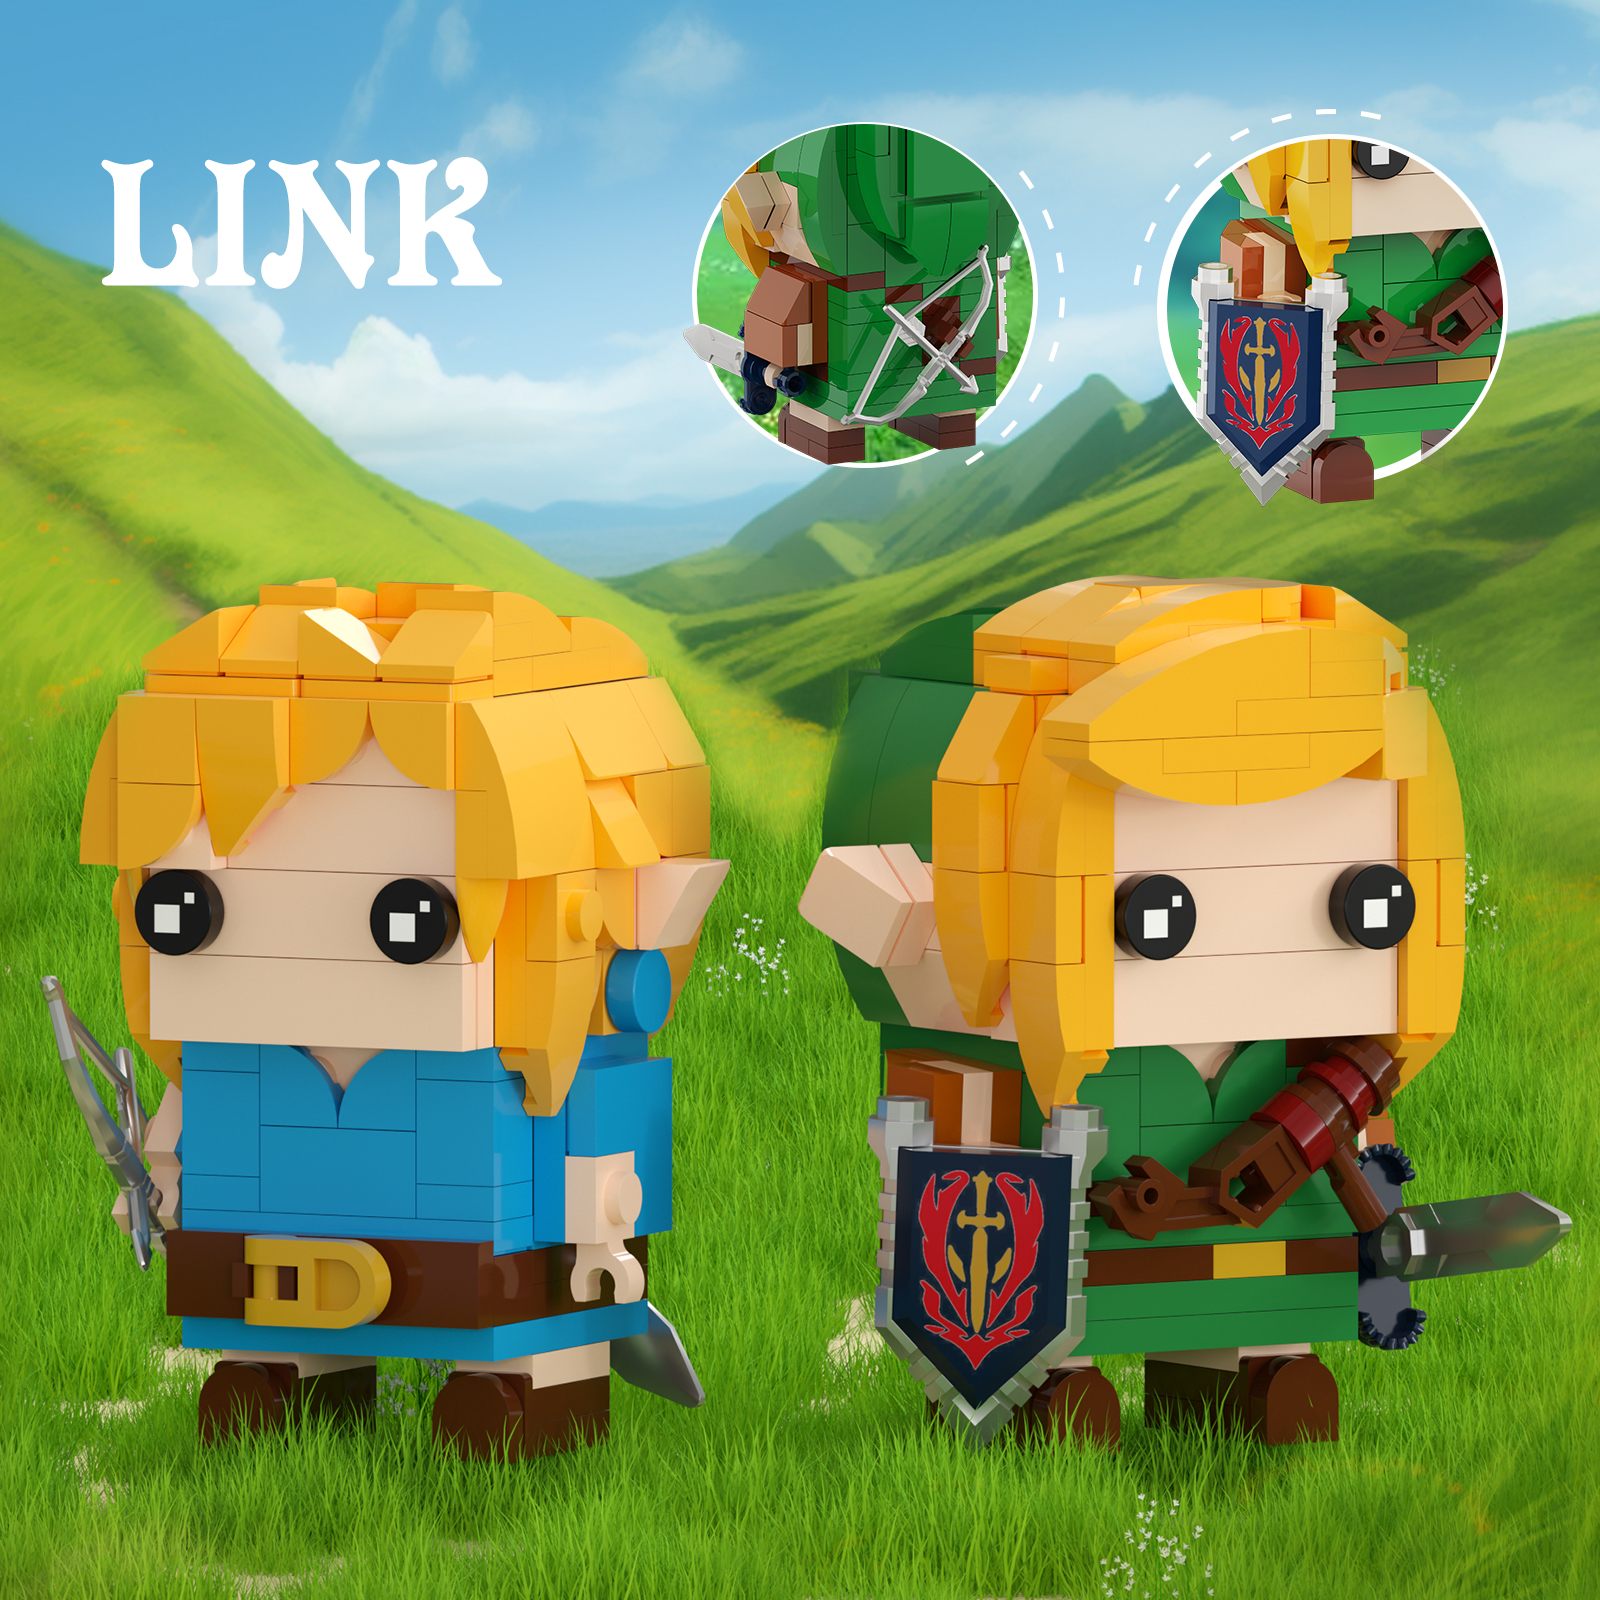 BuildMoc Breath Of The Wild Brickheadz Link Building Block Set For Zeldaed Character Collection Toys For - Zelda Plush